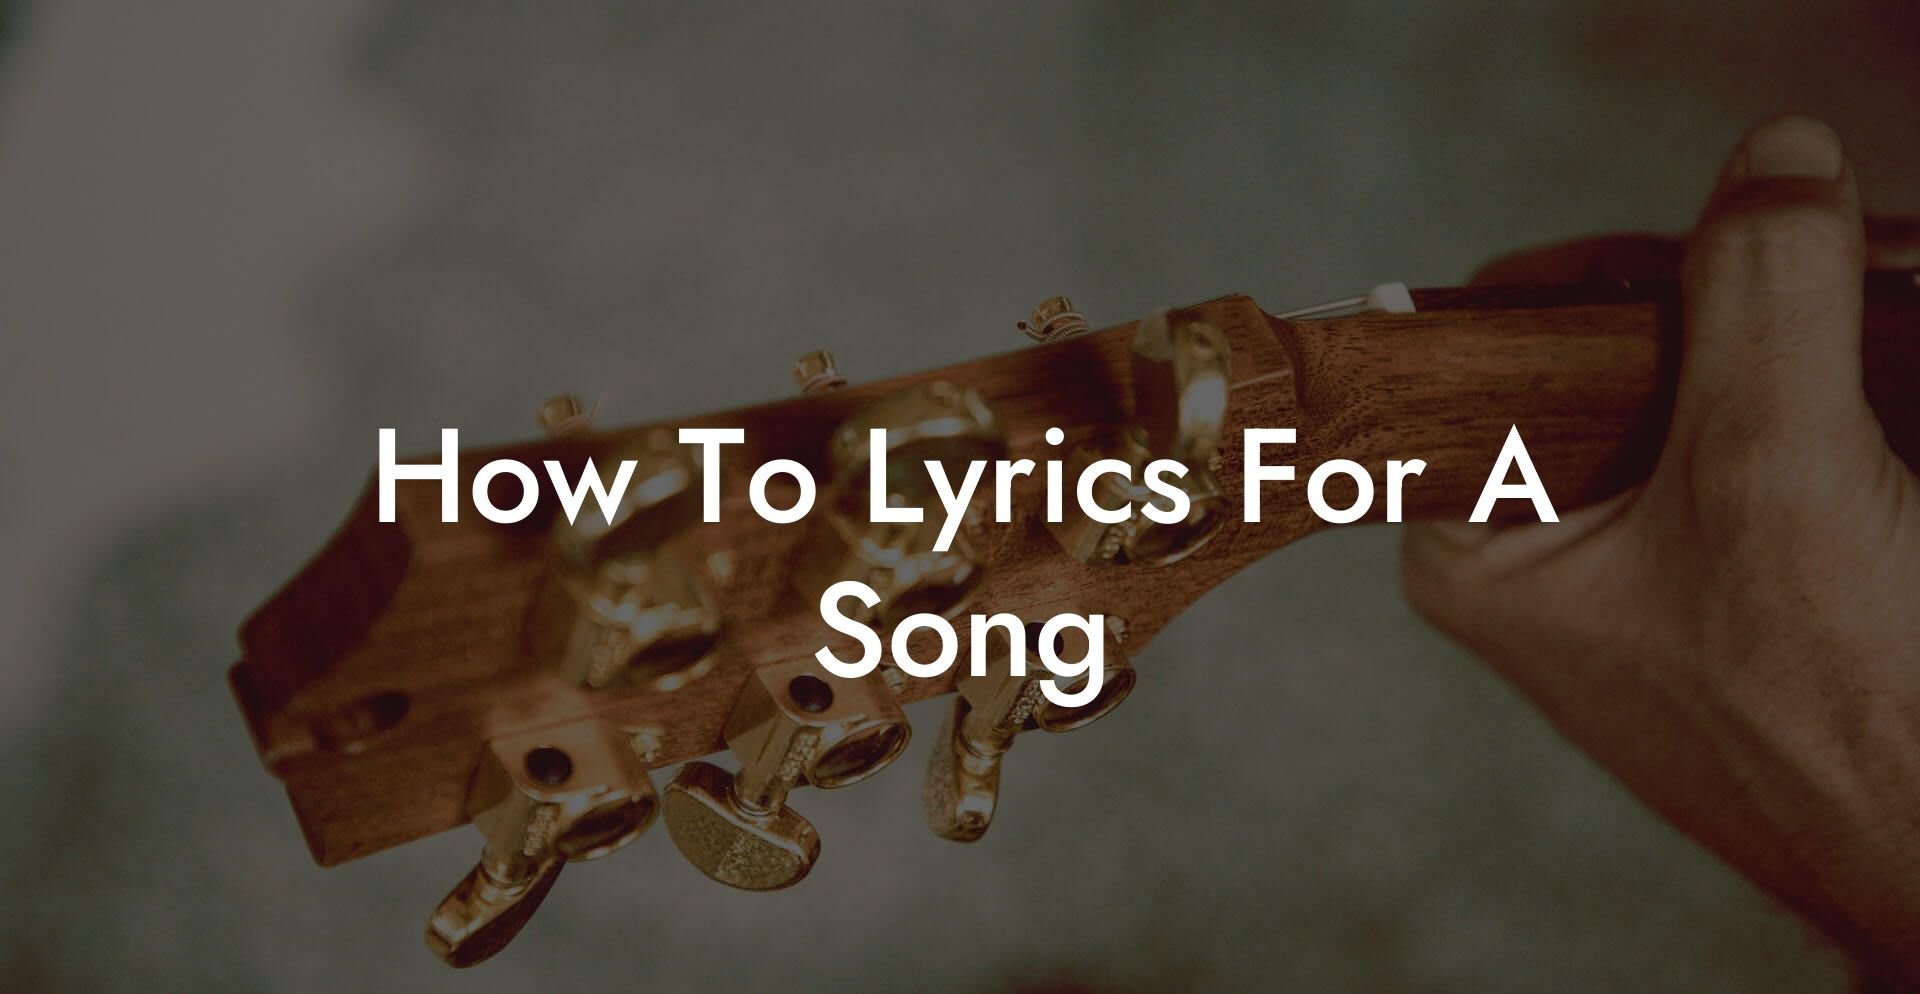 how to lyrics for a song lyric assistant